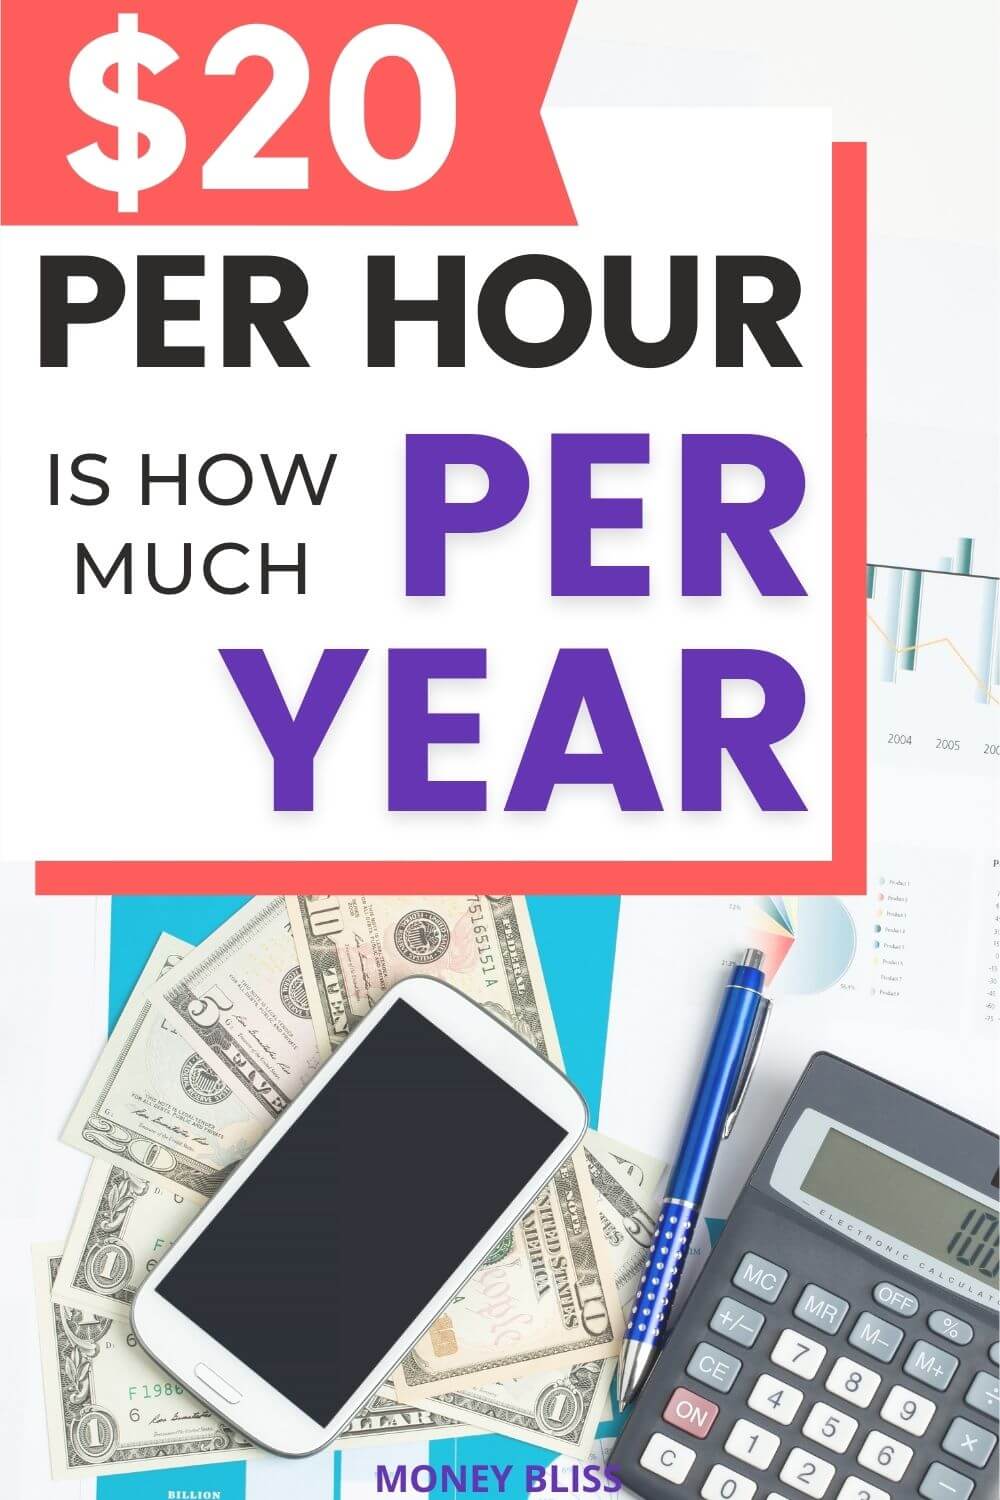 This is important money management skills to know. Learn what 20 an hour is how much a year, month, and day. Plus tips on how to live on it! Even making an additional .50 to $20.50 will increase income.